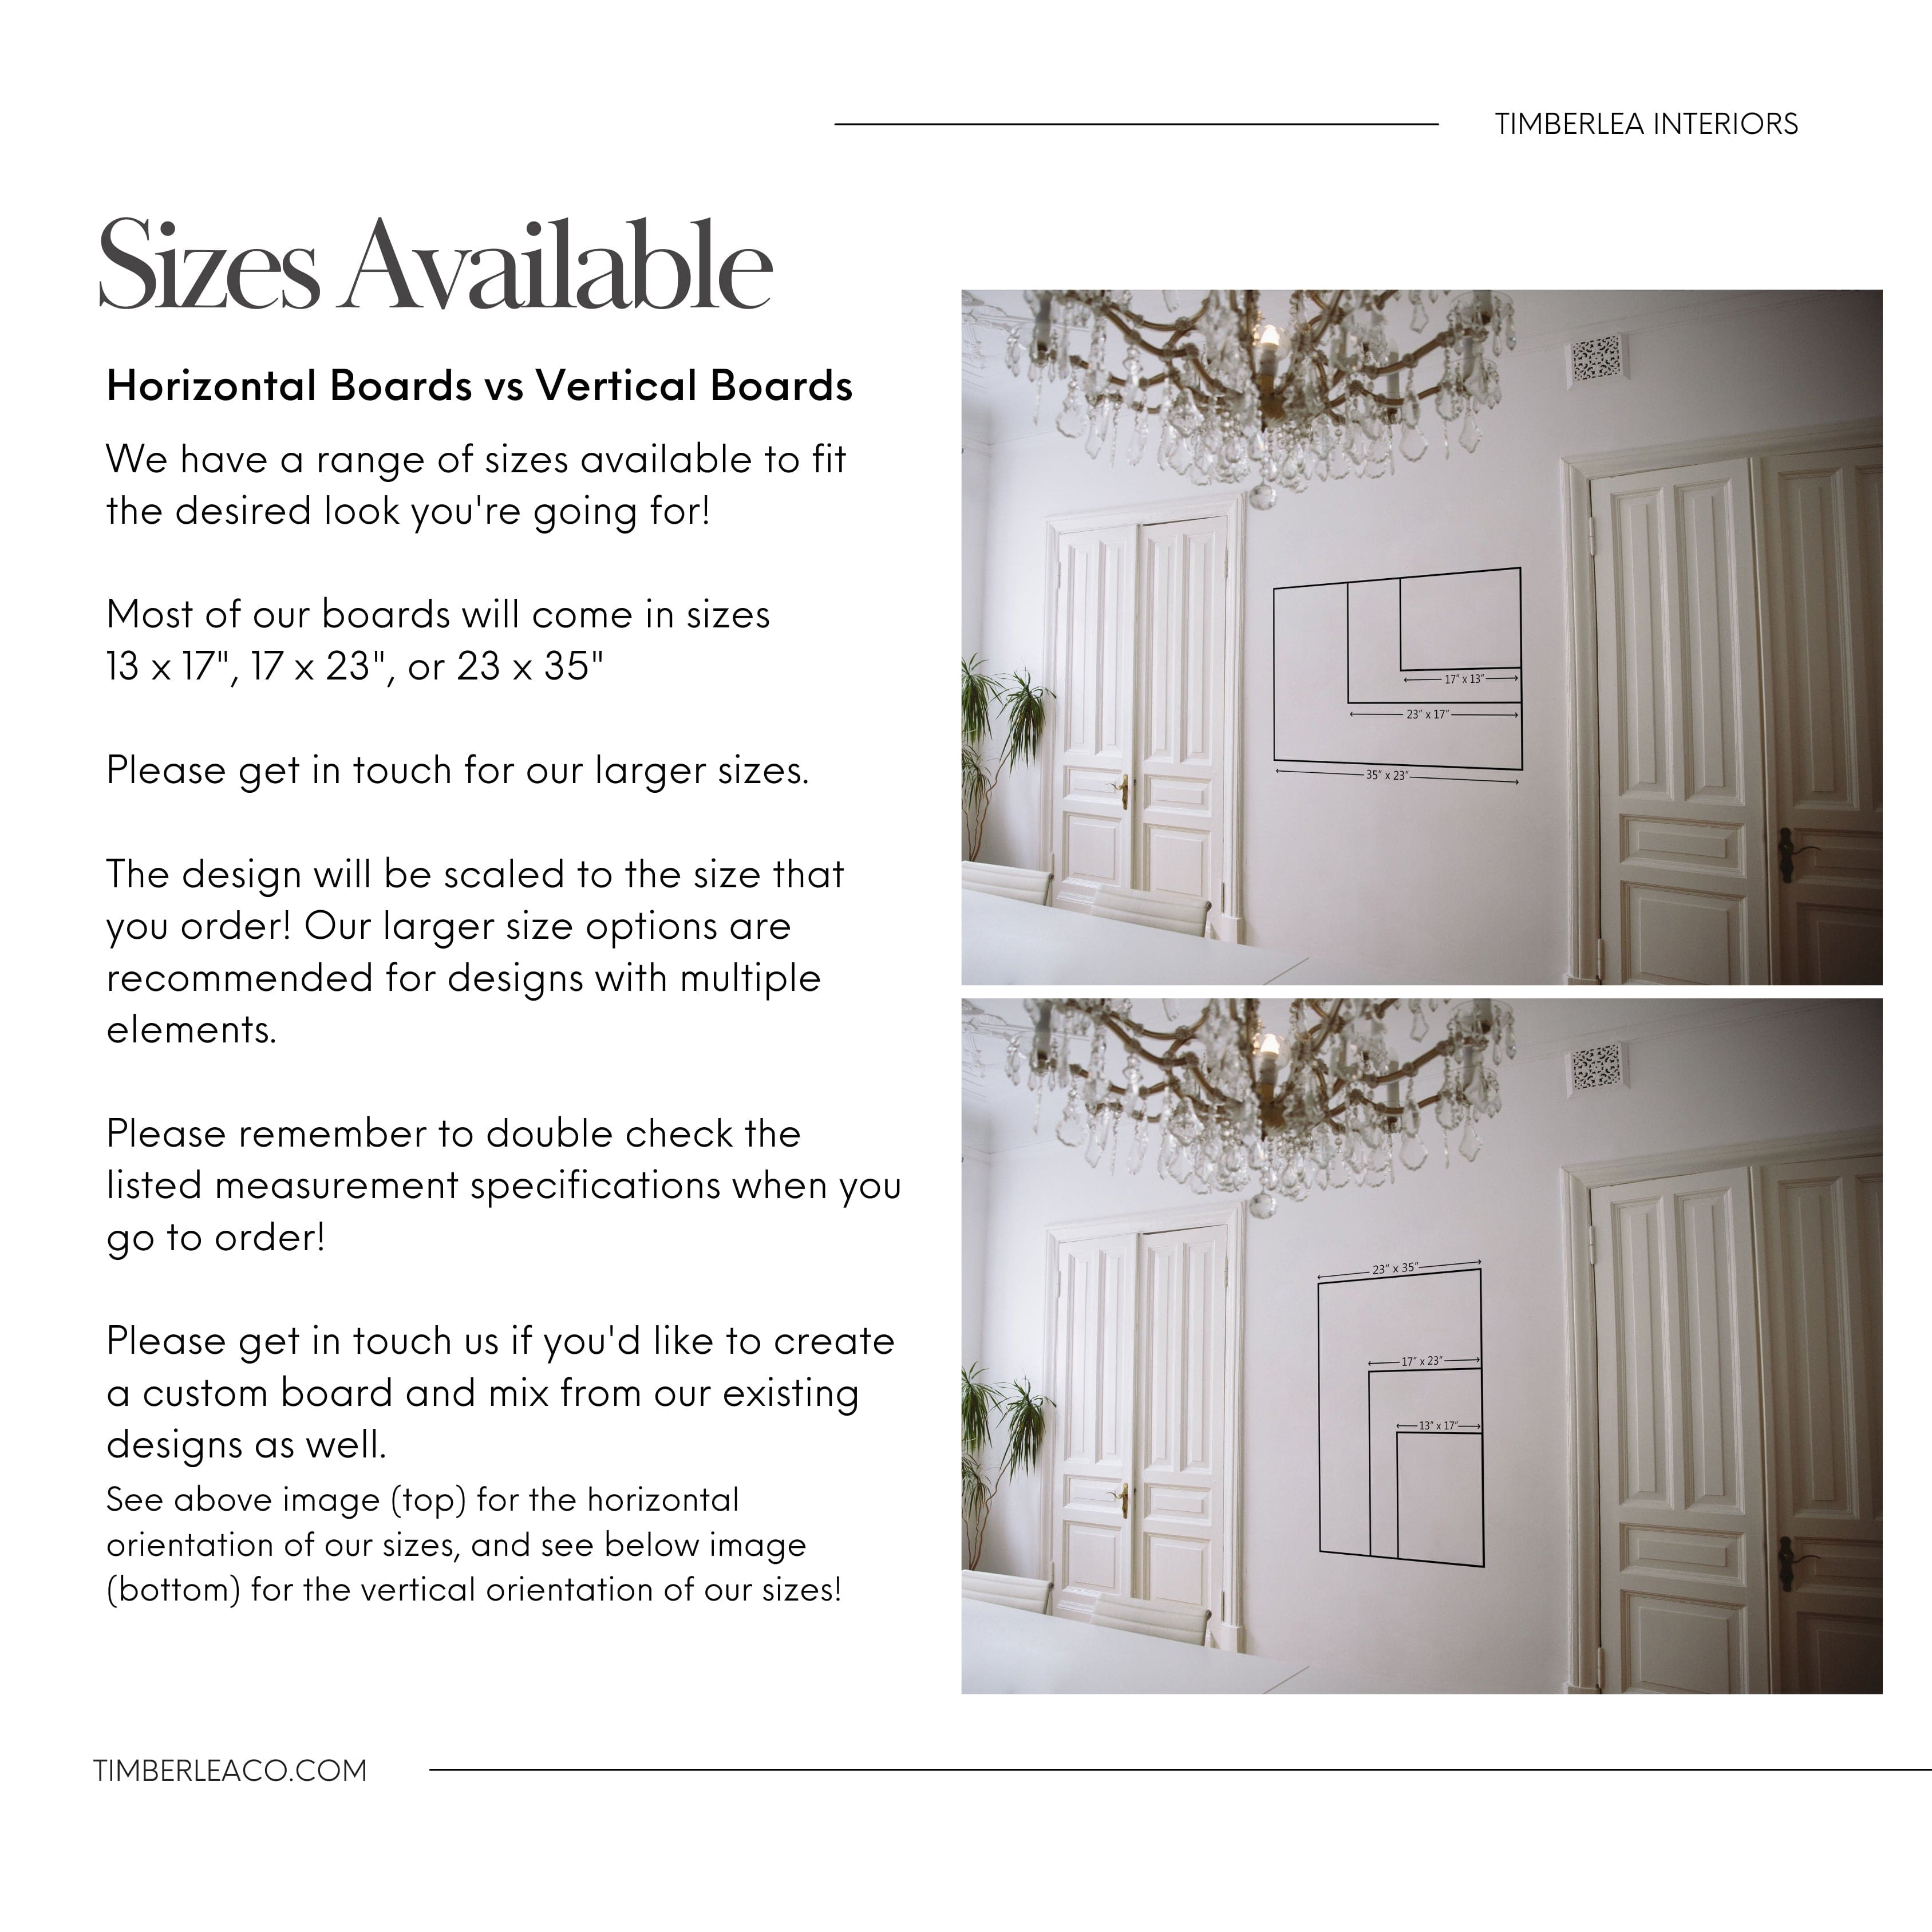 "Sizes Available" information page showing different board sizes in a stylish interior setting, with diagrams of horizontal and vertical board orientations.